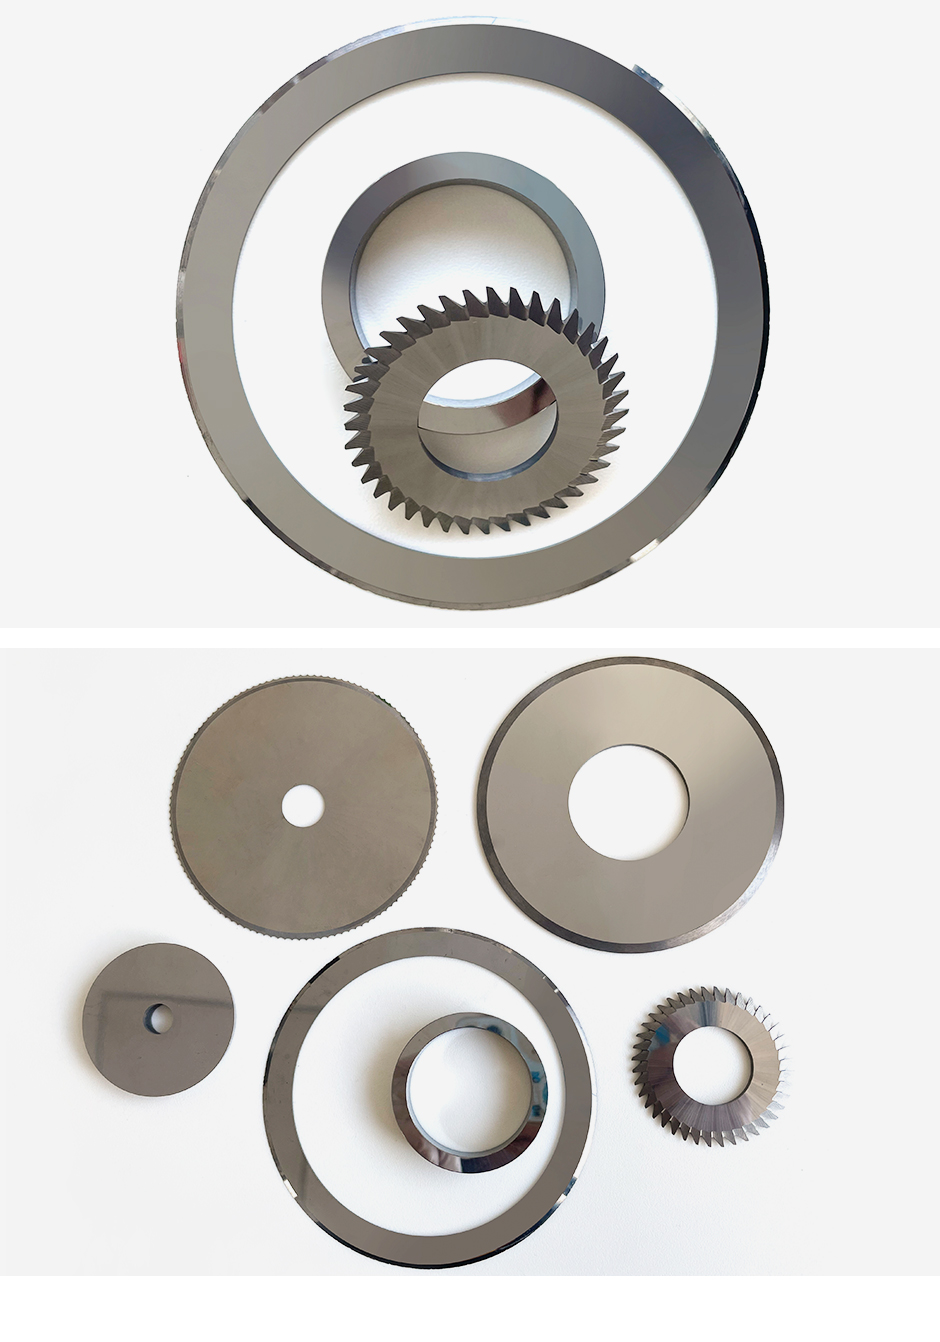 Hot Sell Round Tungsten Cemented Carbide Blade For Woodworking With Teeth